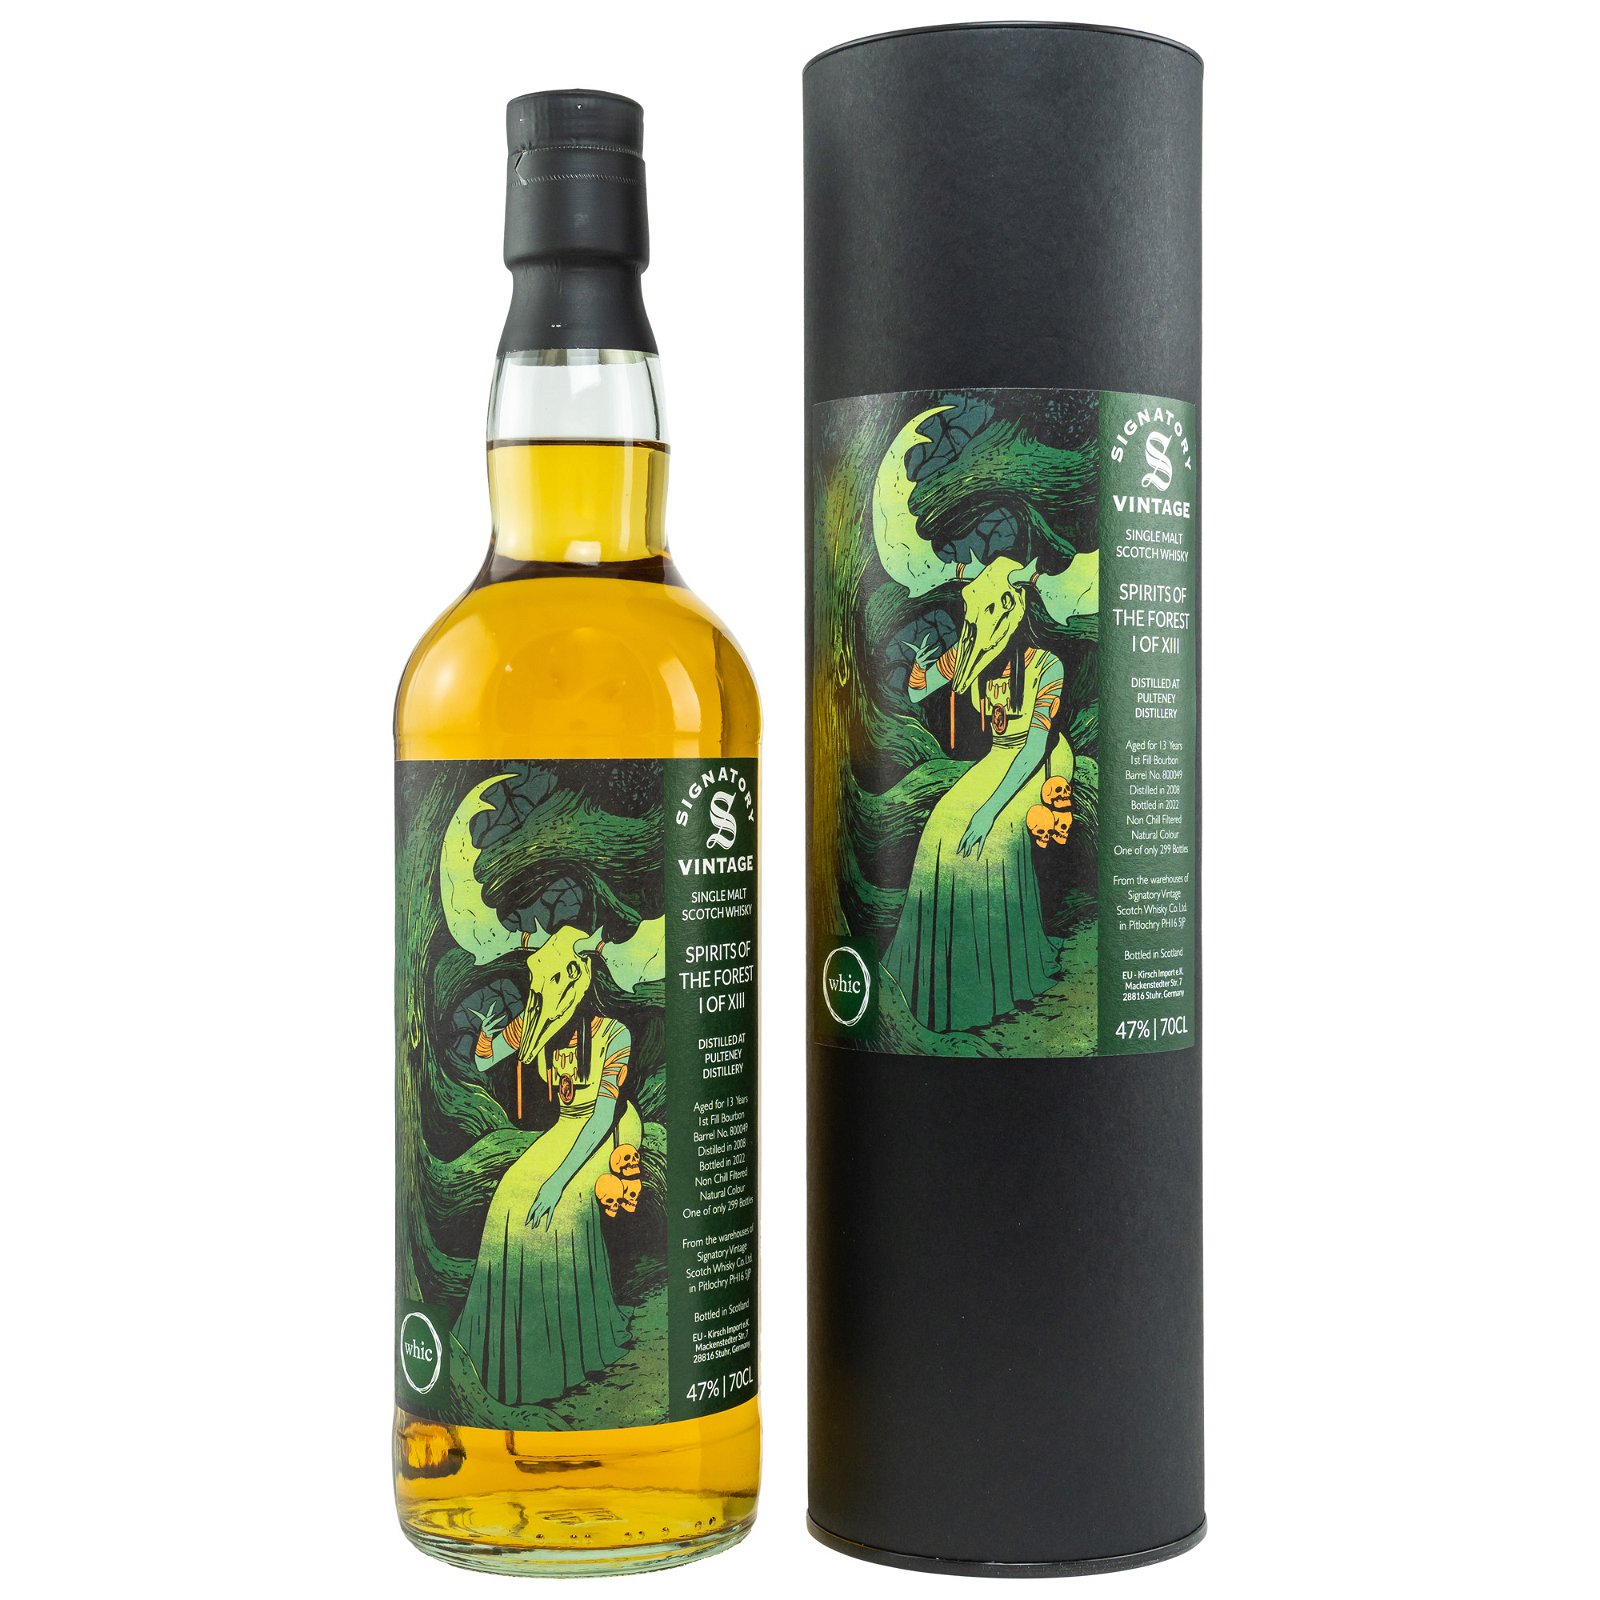 Pulteney 2008/2022 - 13 Jahre Single Bourbon Barrel No. 800049 Spirits of the Forest I of XIII (whic)